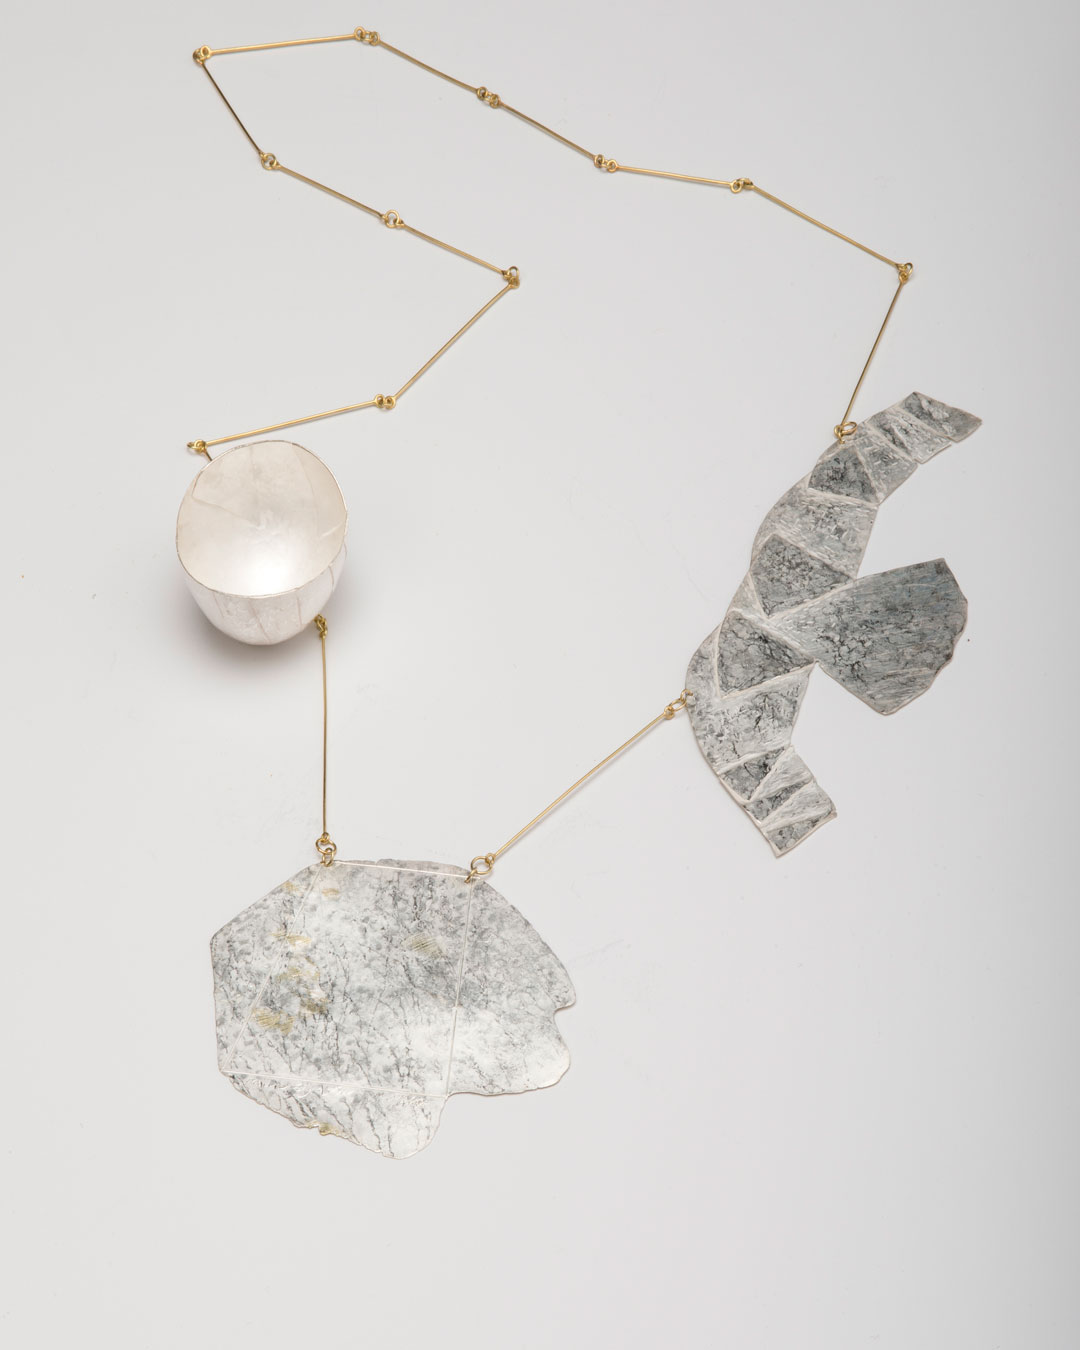 Noam Elyashiv, Story, 2019, necklace; recycled silver, 18ct gold, 250 x 350 mm, €5820